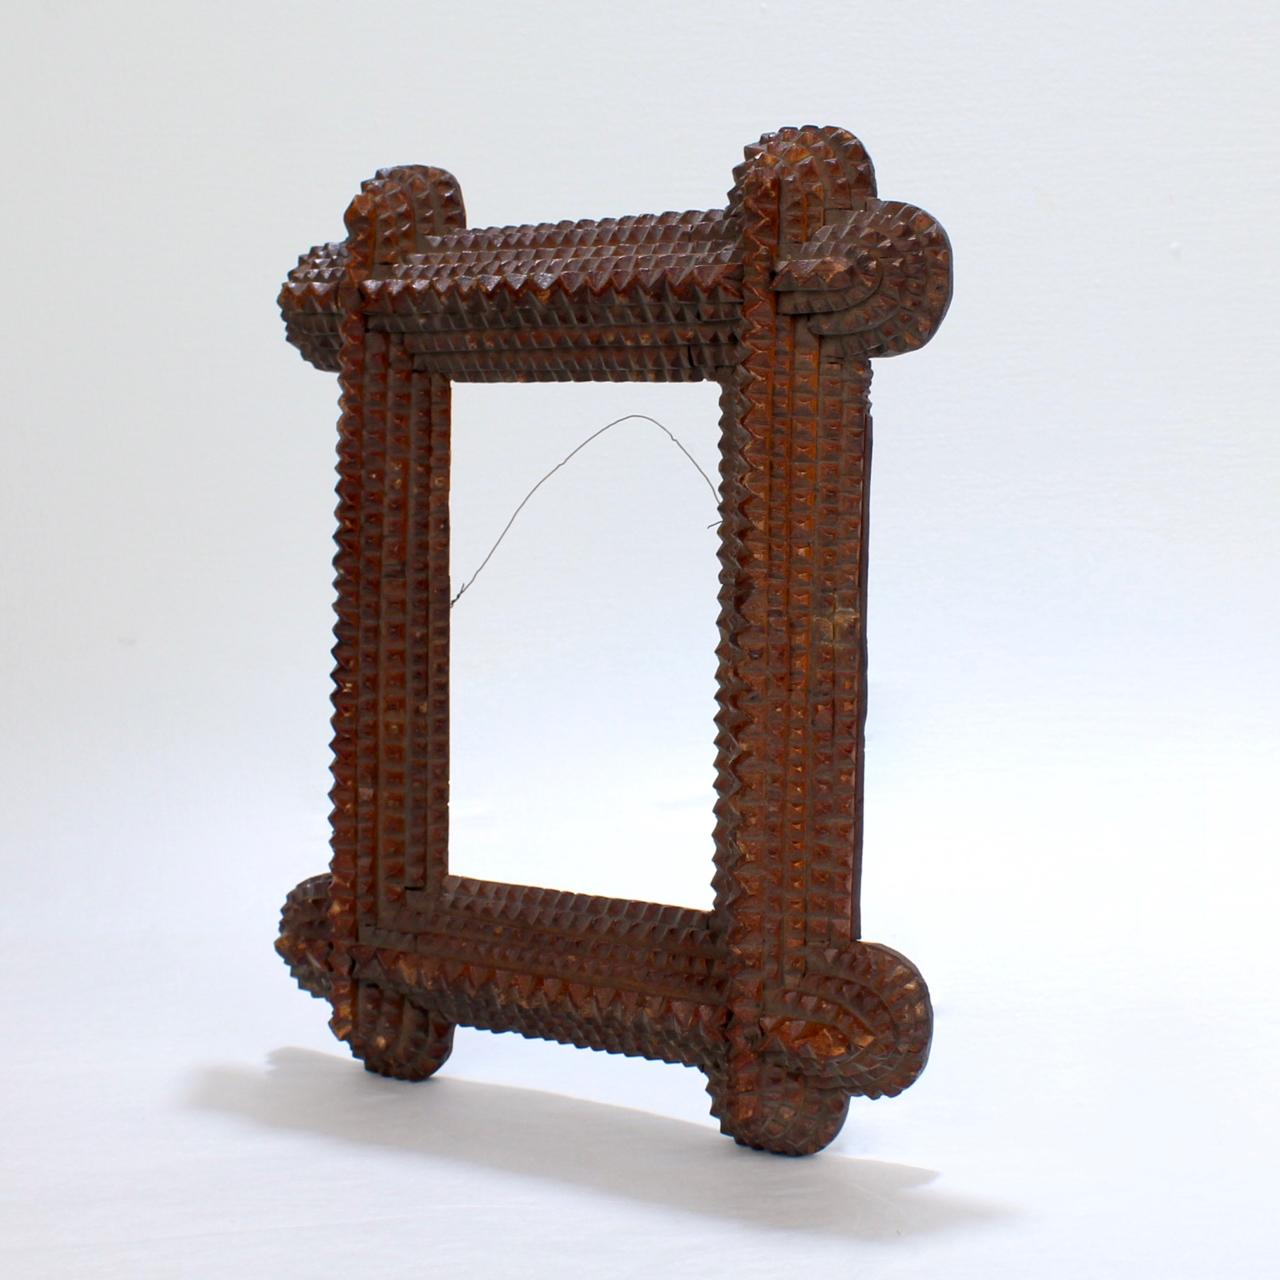 A wonderful antique Tramp Art picture frame. 

With five levels and a good, old red/brown wash finish.

A wonderful Folk Art frame!

Width ca. 8 in.
Length ca. 10 in.
Depth ca. 1 5/8 in.
Sight width just over 3 1/4 in.
Sight length just